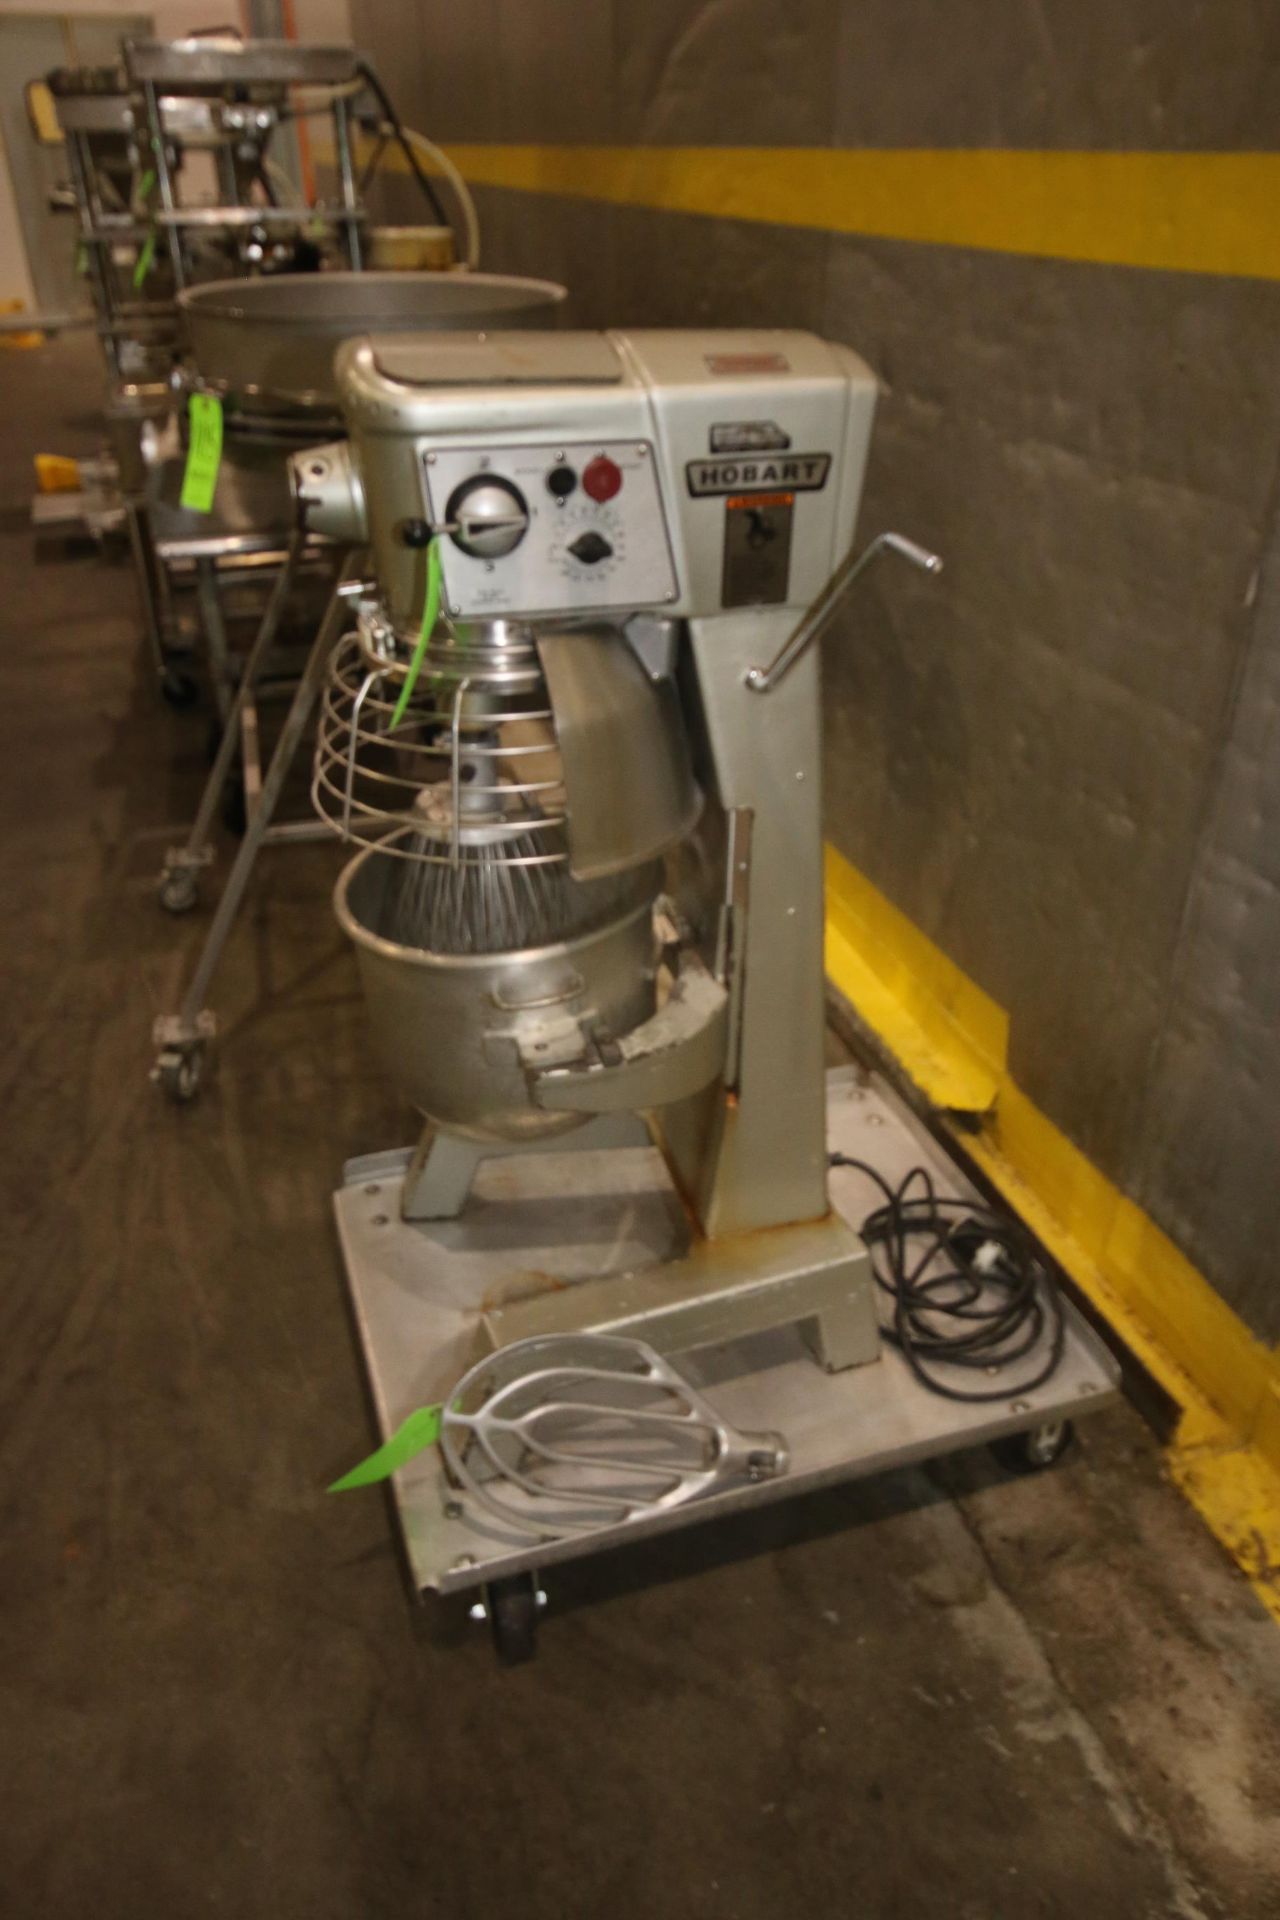 Hobart Mixer, M/N D 3001, S/N 11-245-583, 200 Volts, 1725 RPM, with S/S Mixing Bowl, Includes Whip - Image 2 of 8